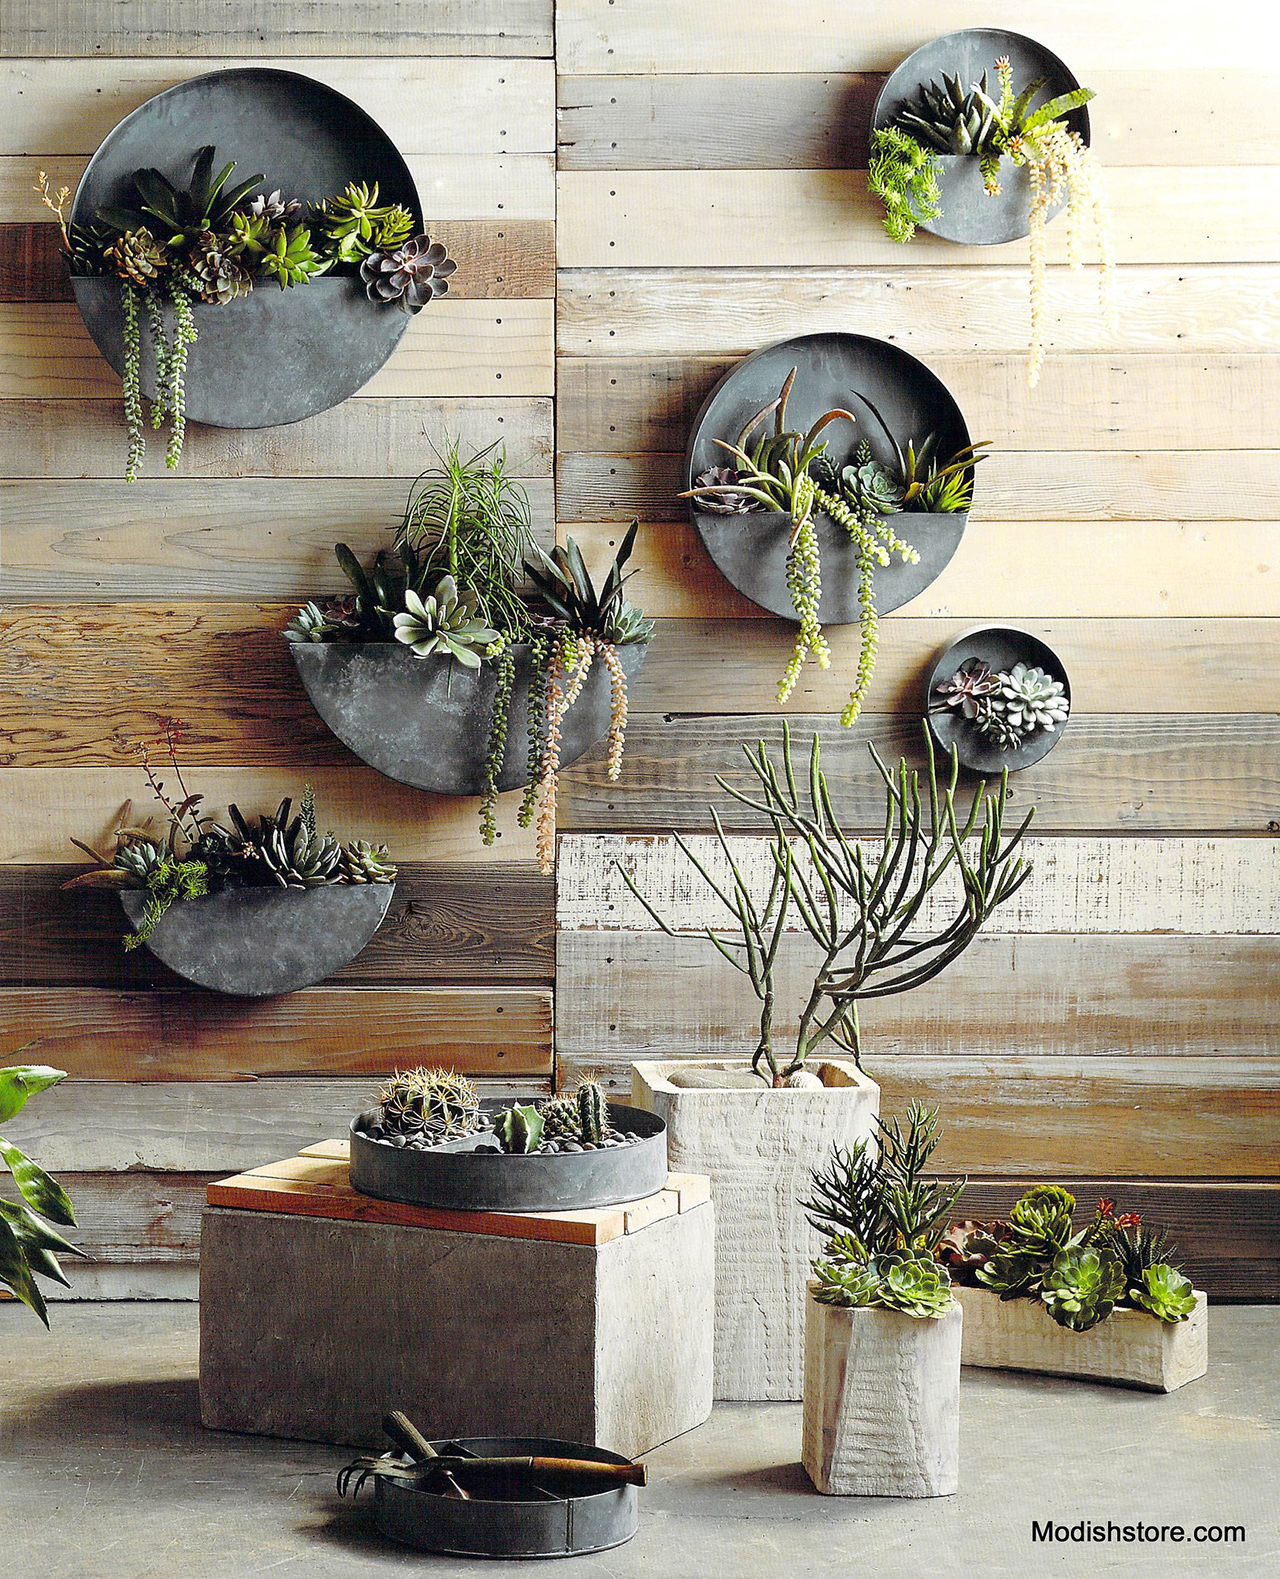 25-muted-round-zinc-planters-allow-plants-to-shine-vertical-gardens-homebnc